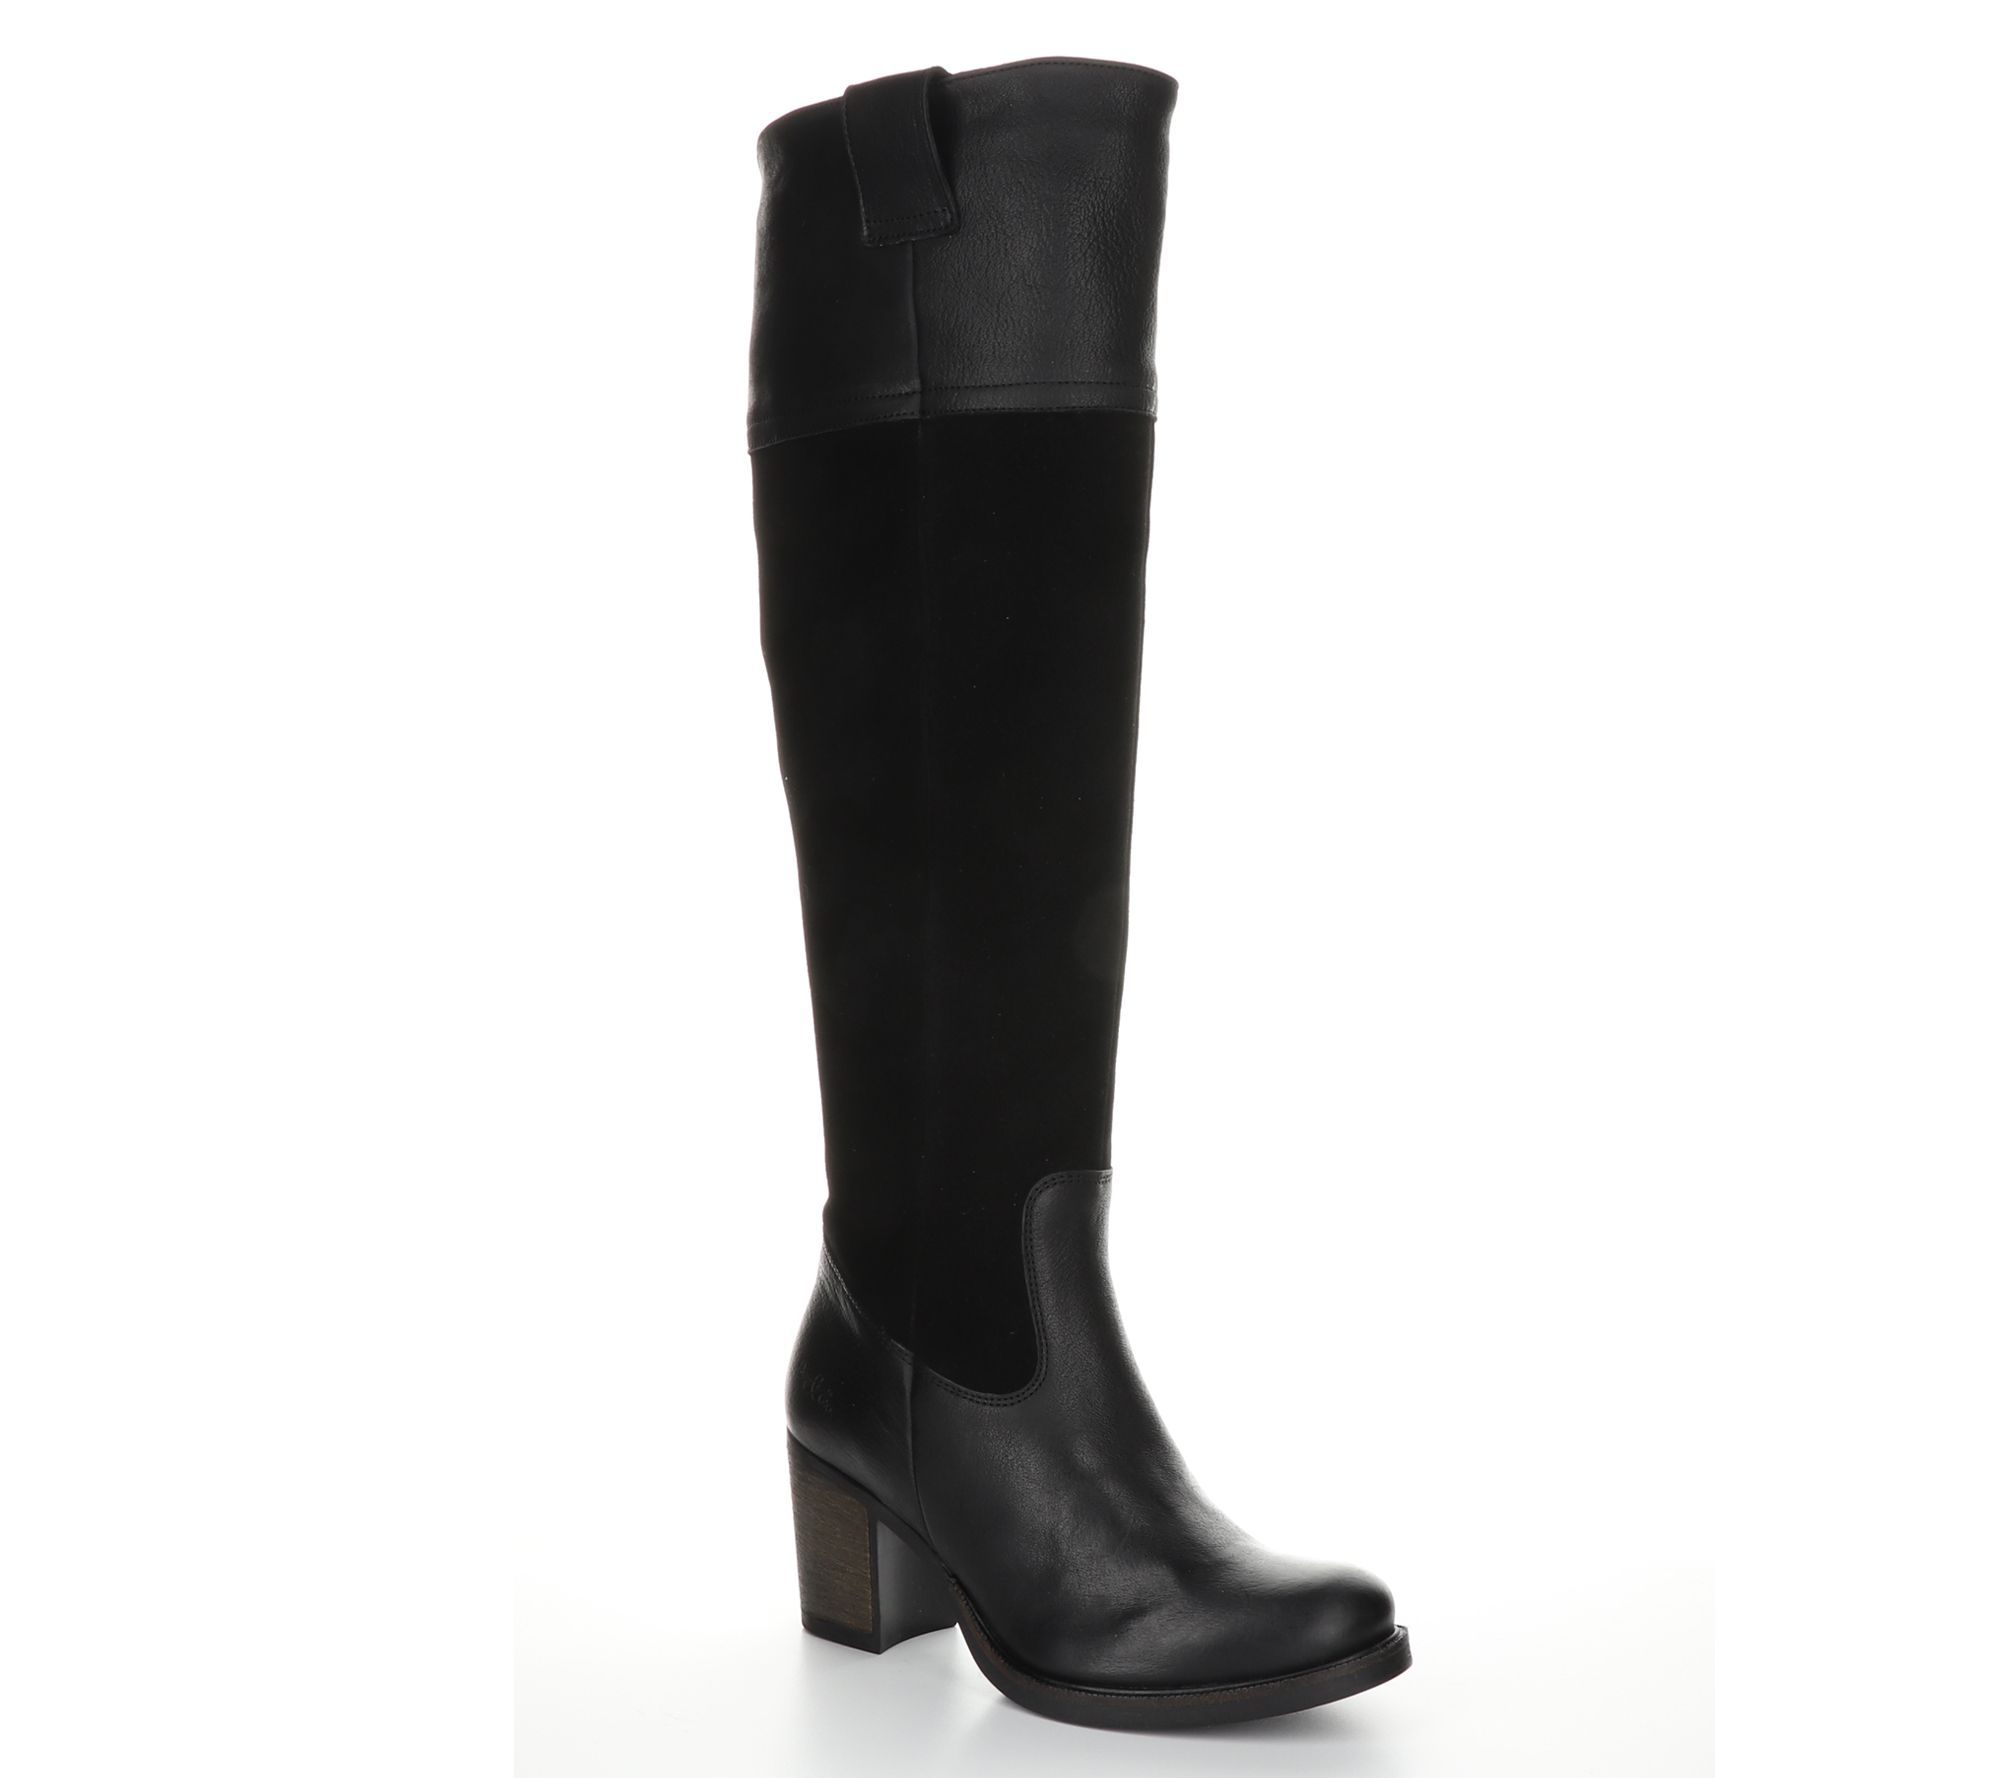 Bos & Co Leather Rubber Heel Boots - Billing - QVC.com